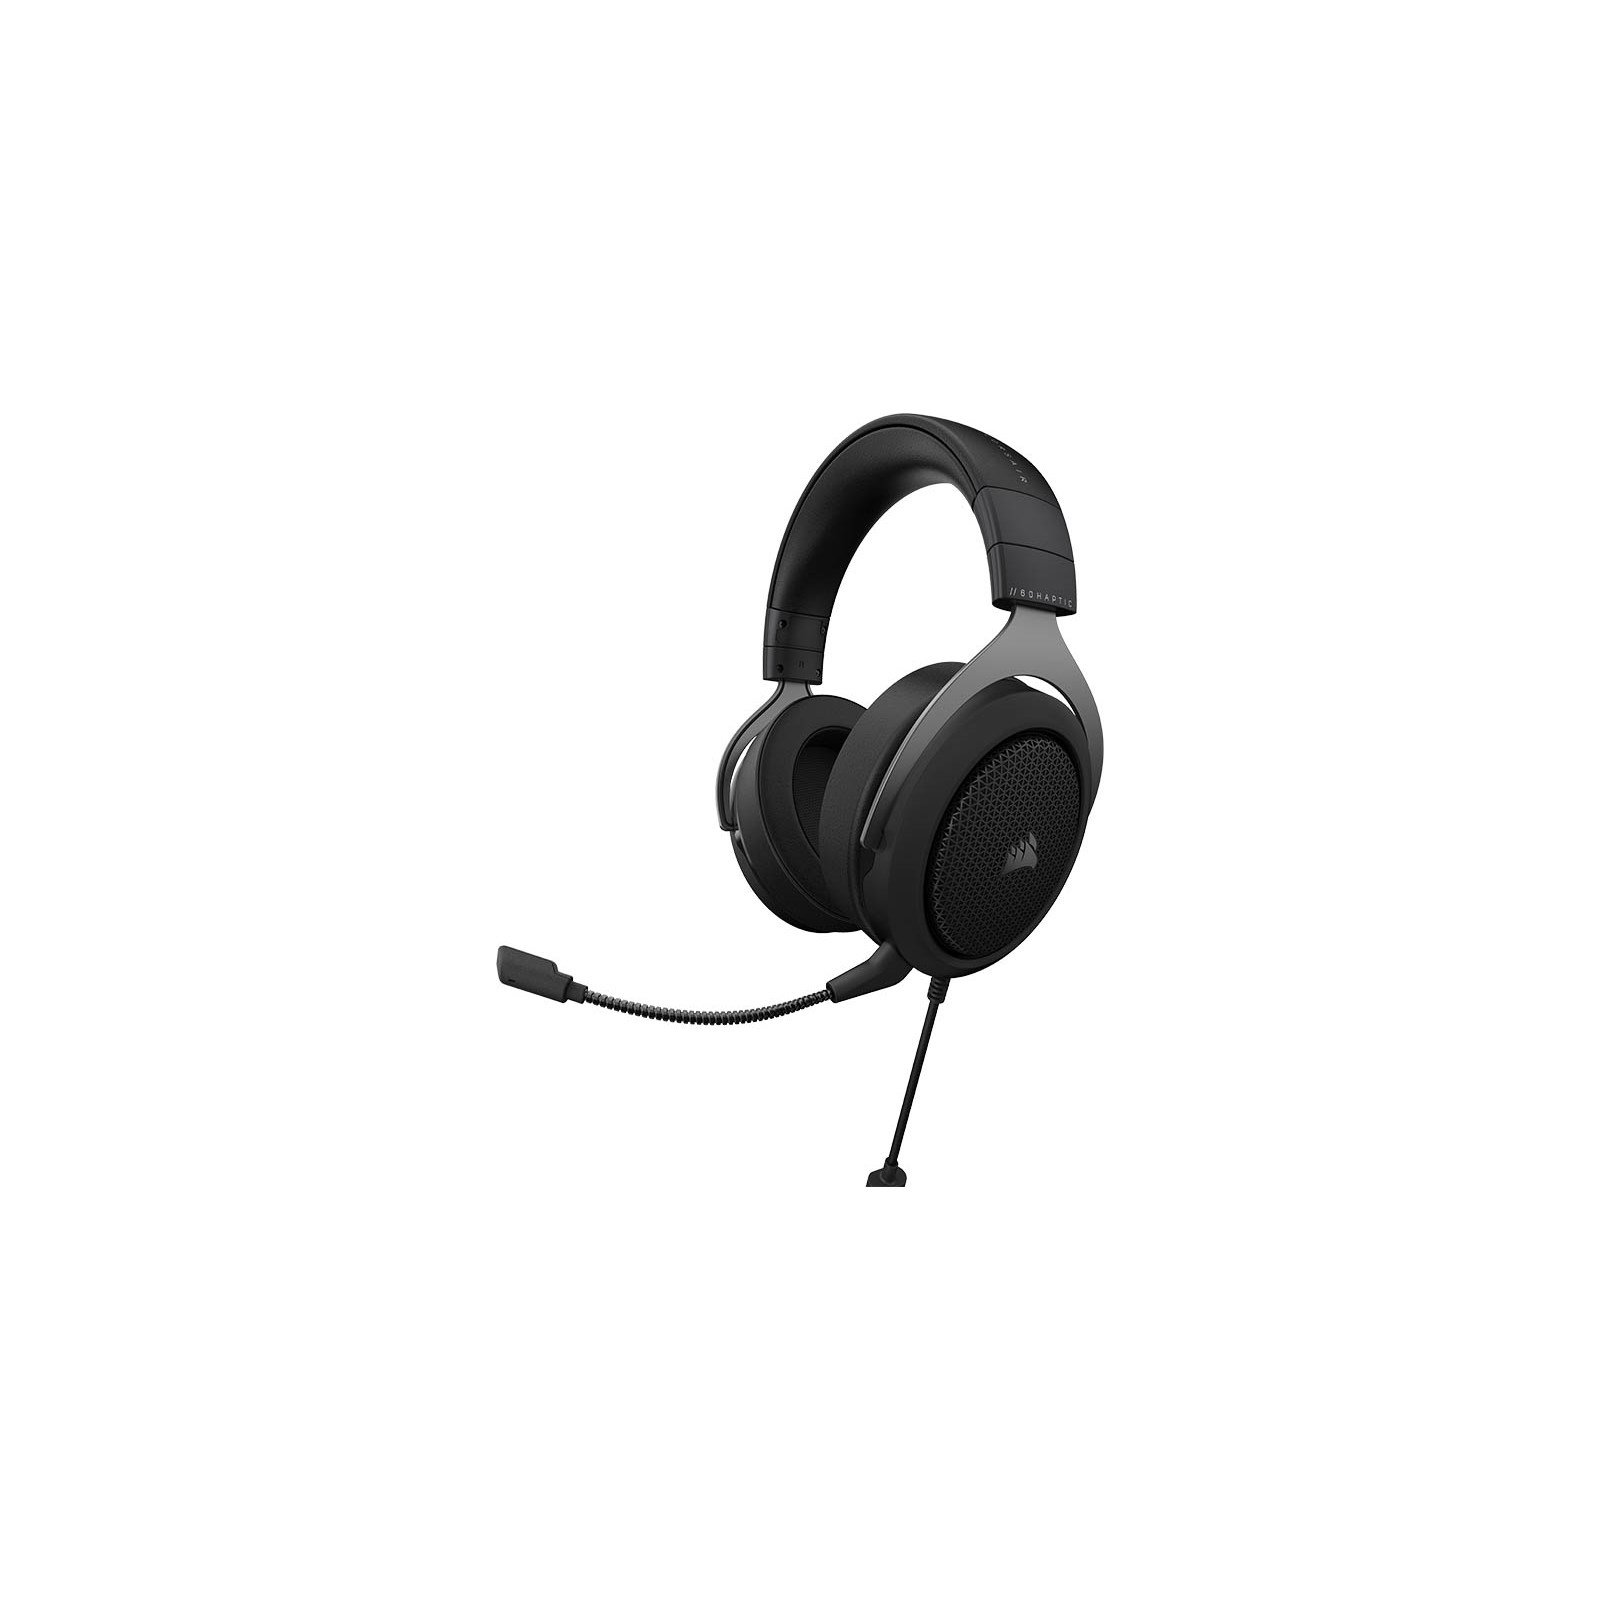 HS60 Gaming with Carbon - CA-9011228-EU | Black Headset Haptic Stereo Corsair in HAPTIC Bass CCL